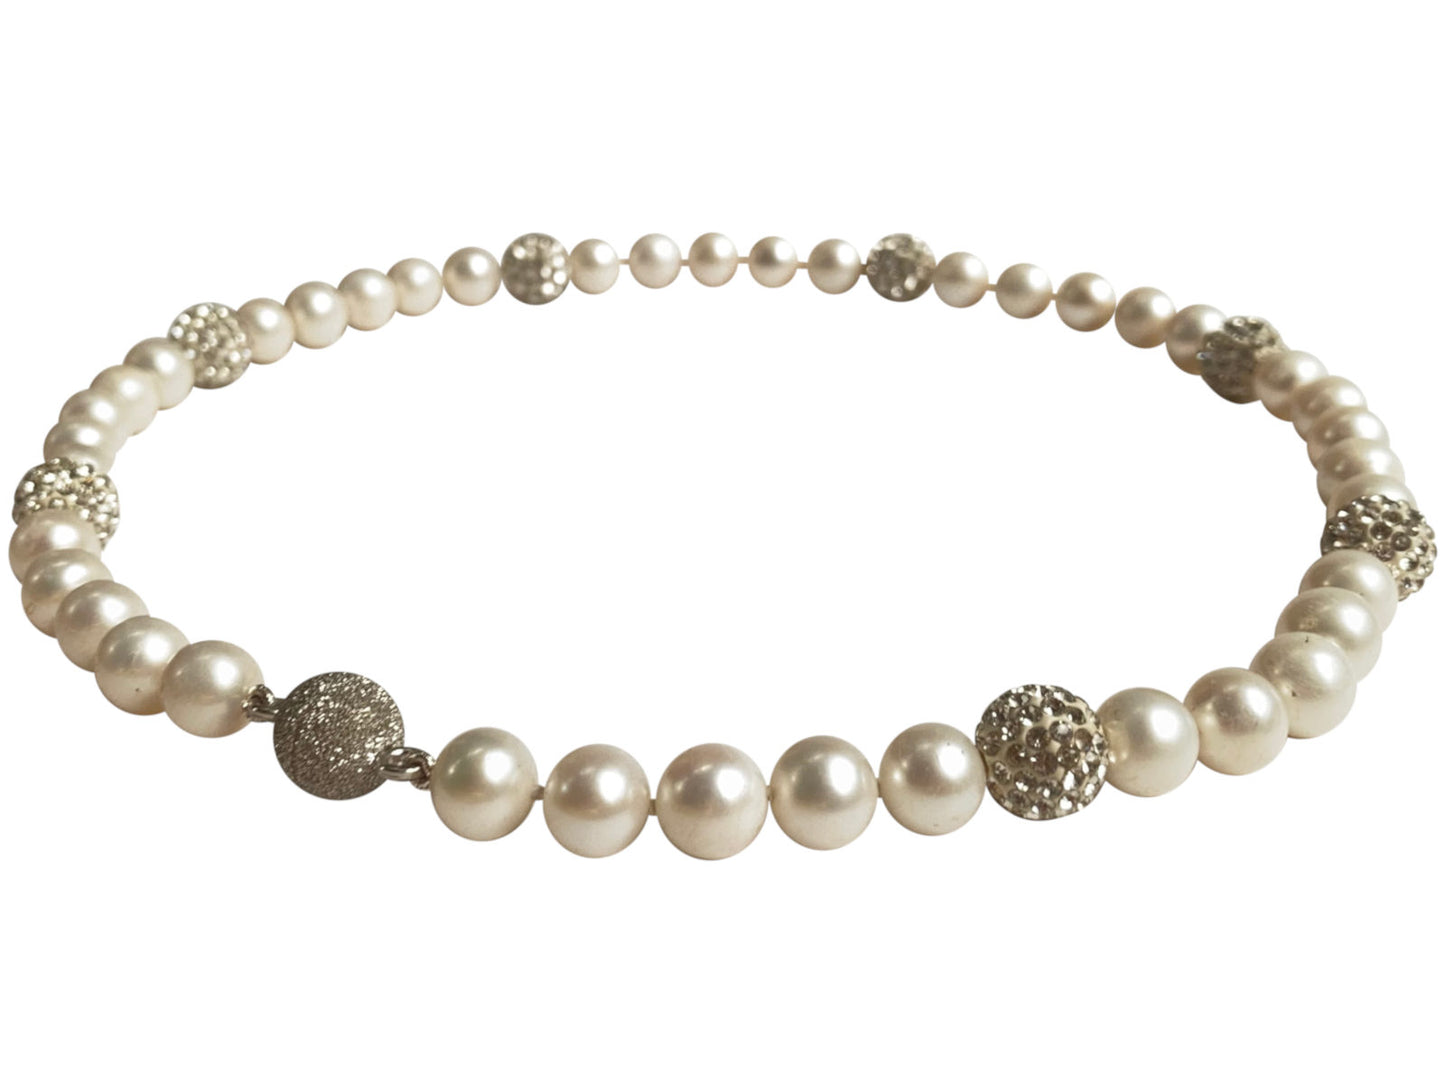 Freshwater Pearl Necklace 8-9mm On Sterling Silver Magnetic Clasp Plus Seven Shamballa Balls Angle View